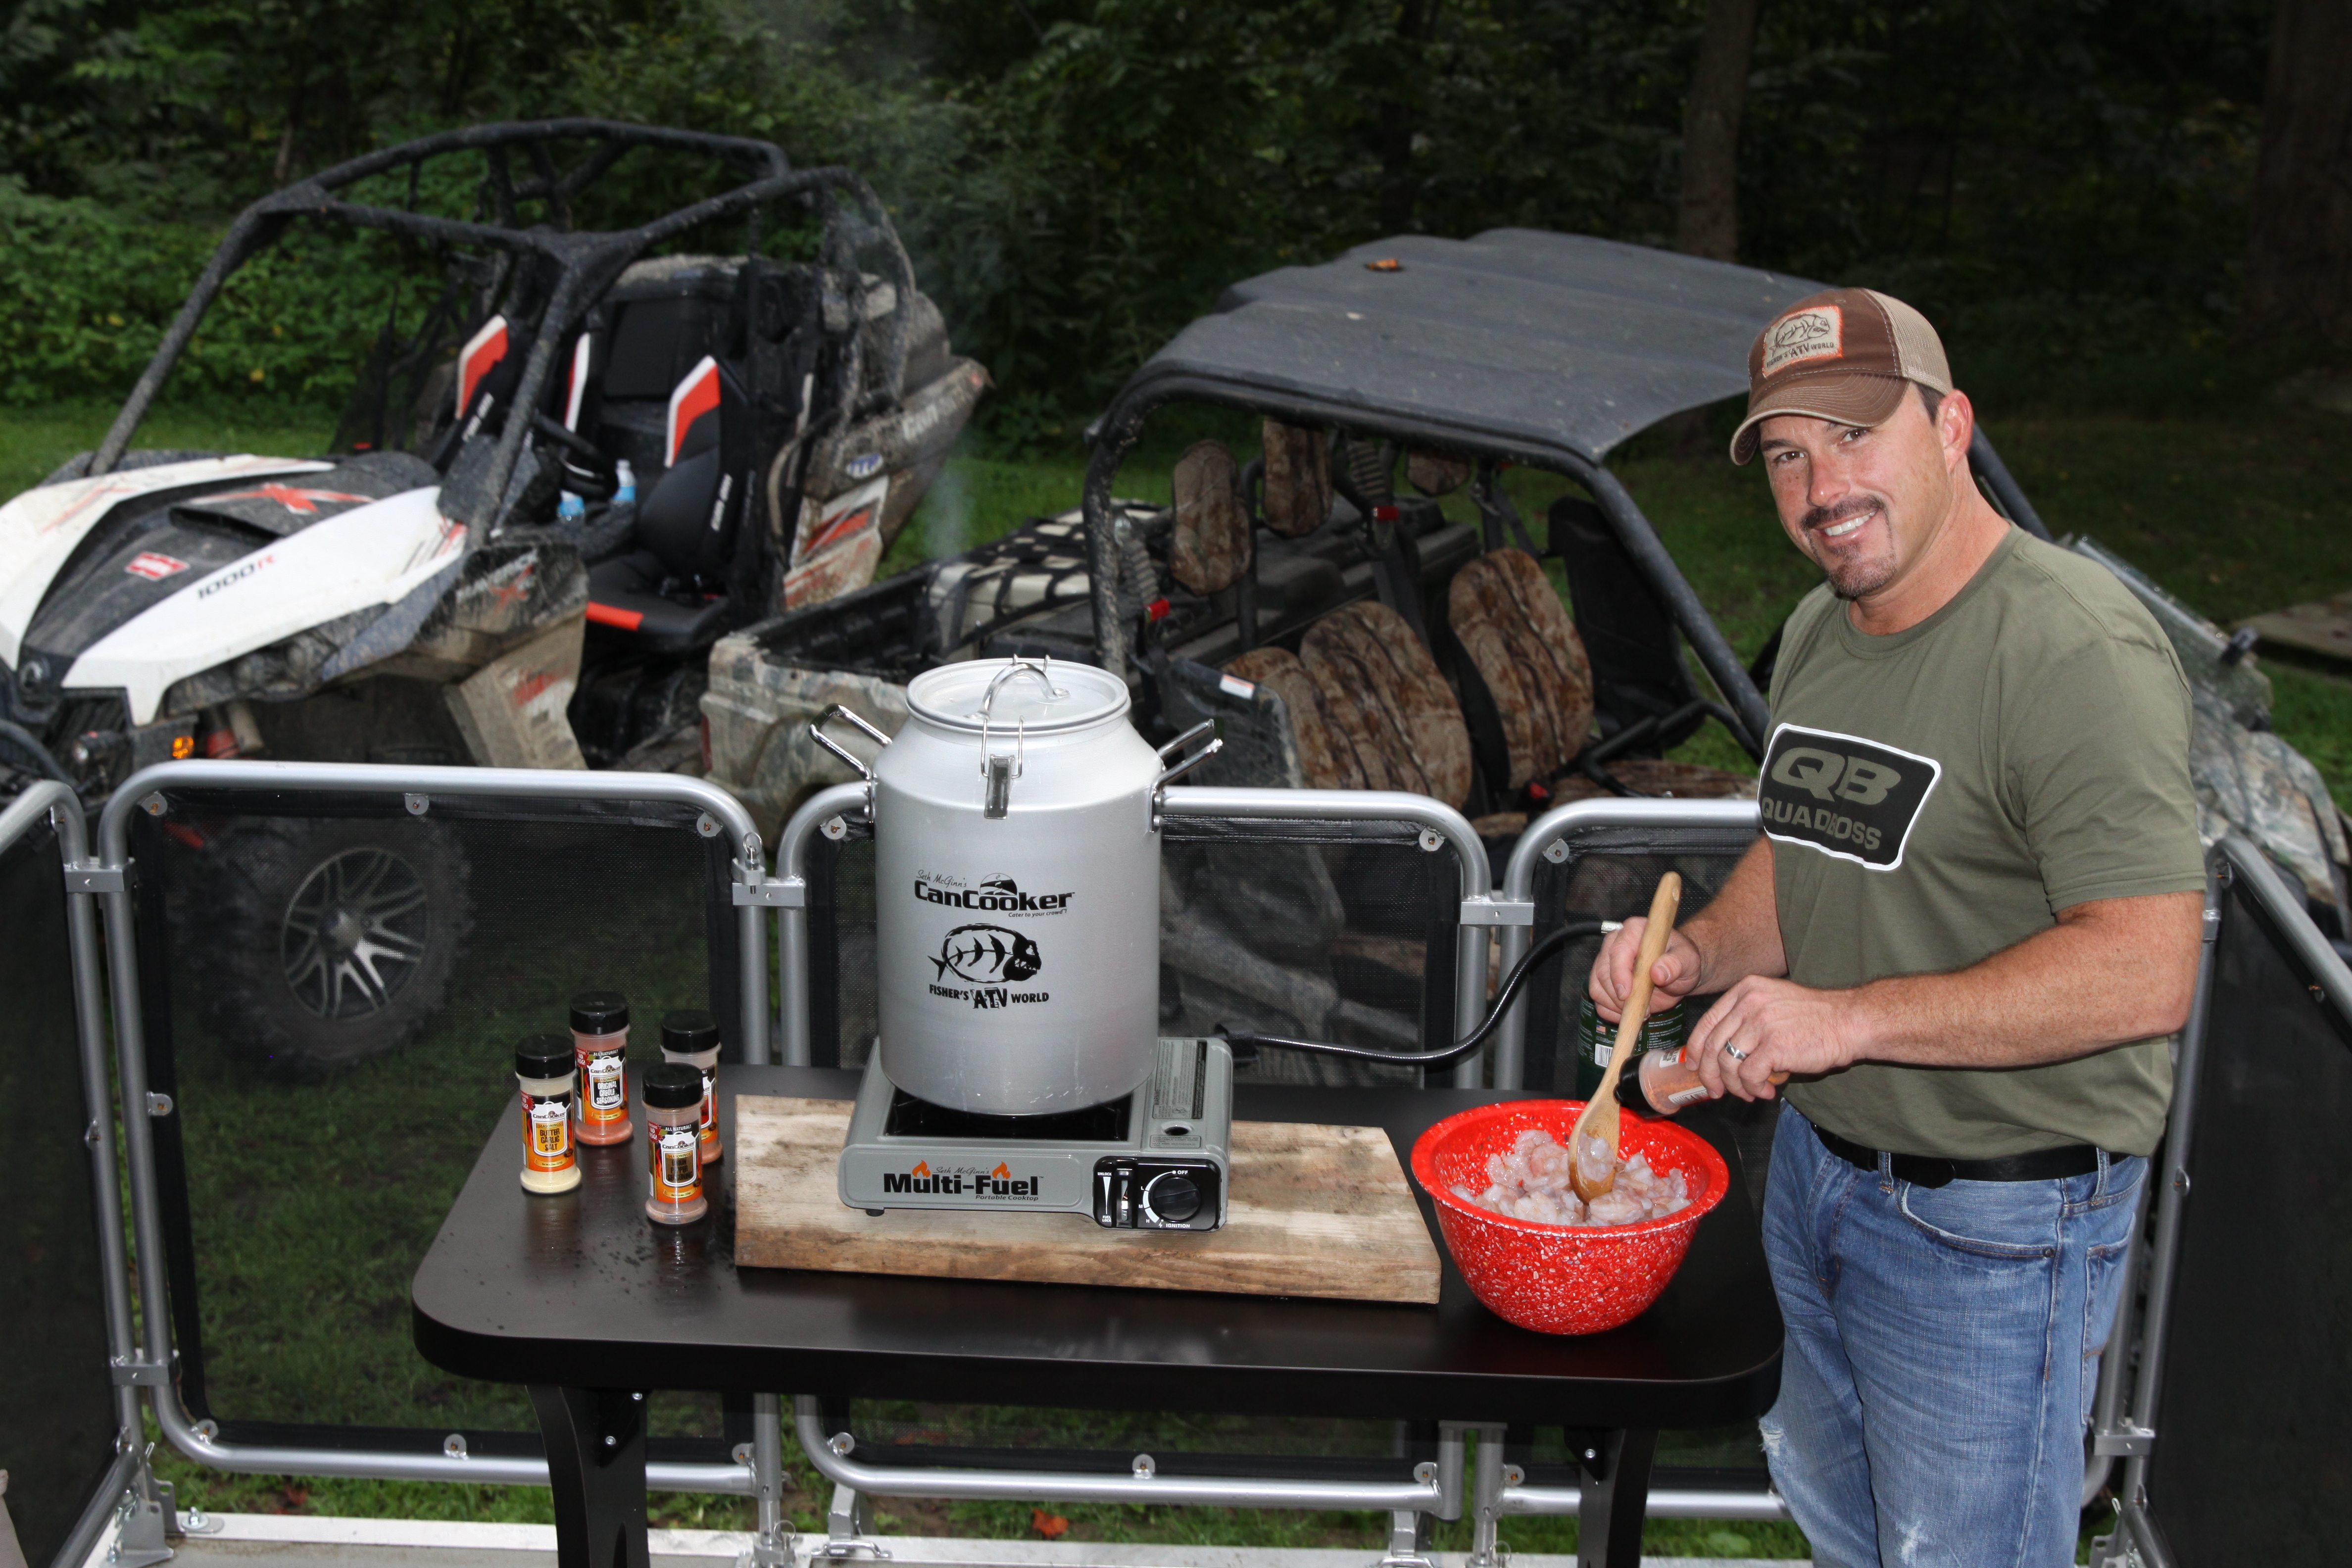 Brian Photo Shoot to Promote & Endorse the Can Cooker